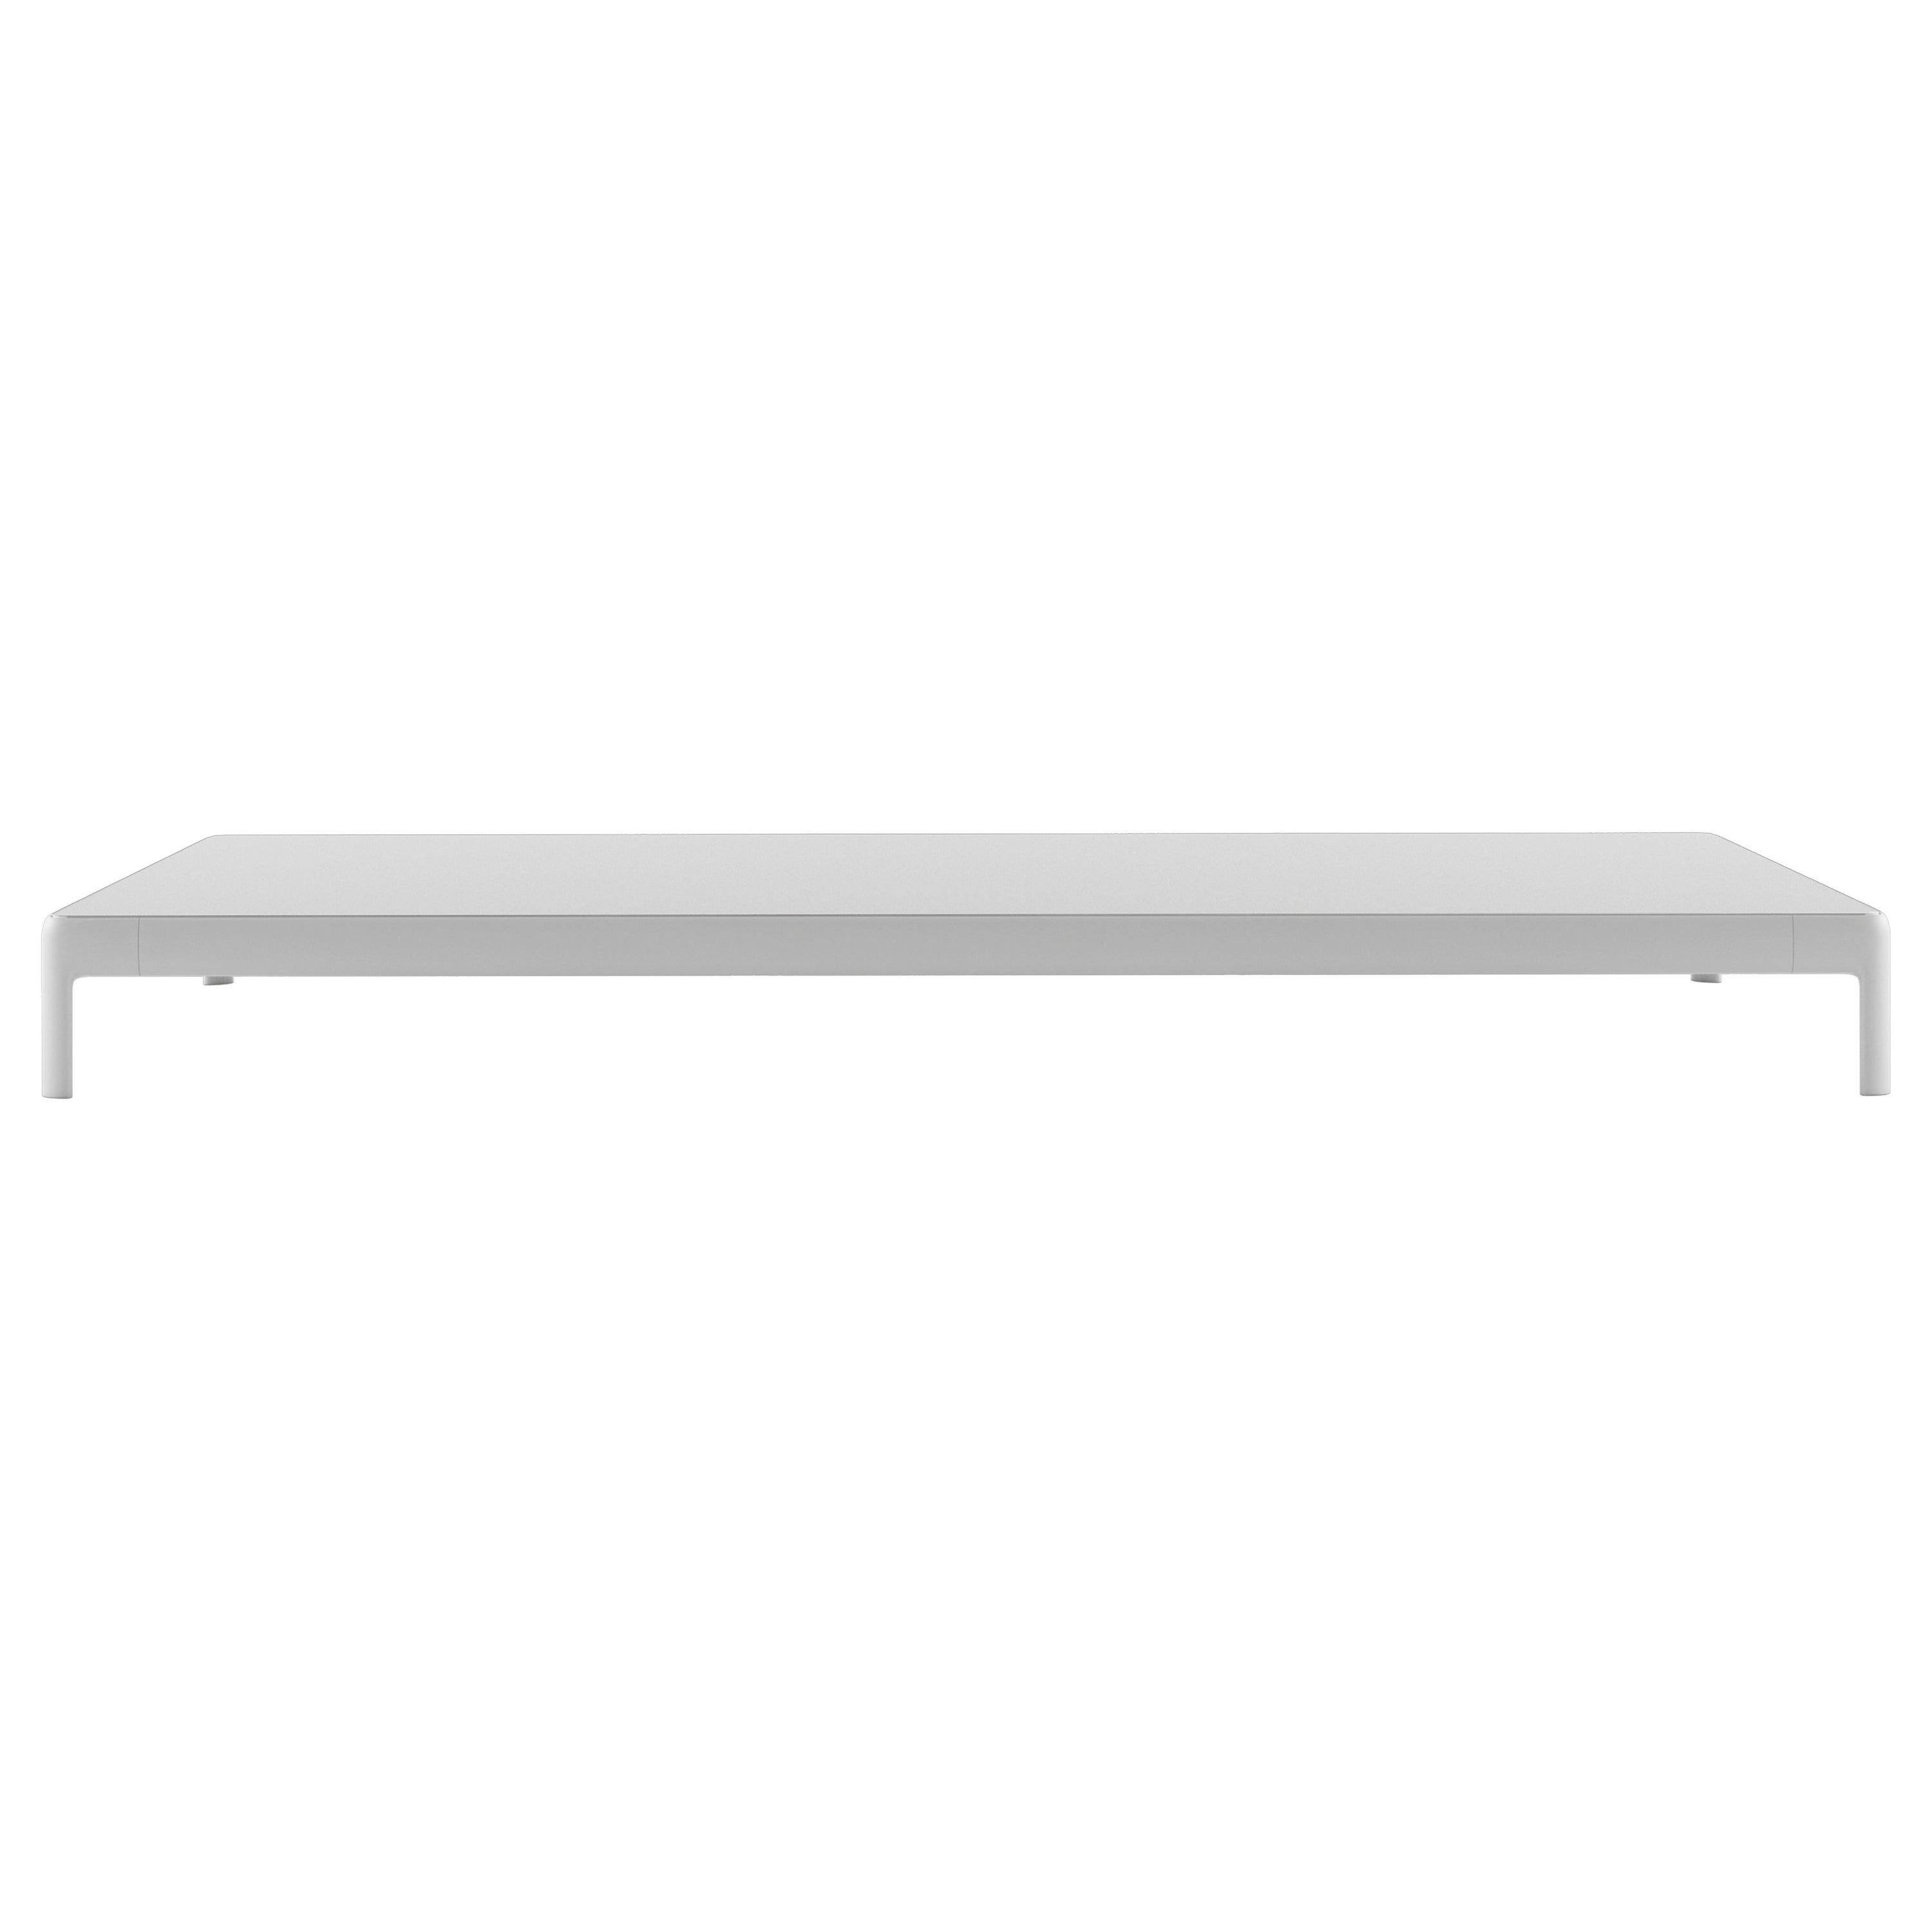 Alias P74 AluZen Soft Low Table Outdoor in White with Lacquered Aluminium Frame